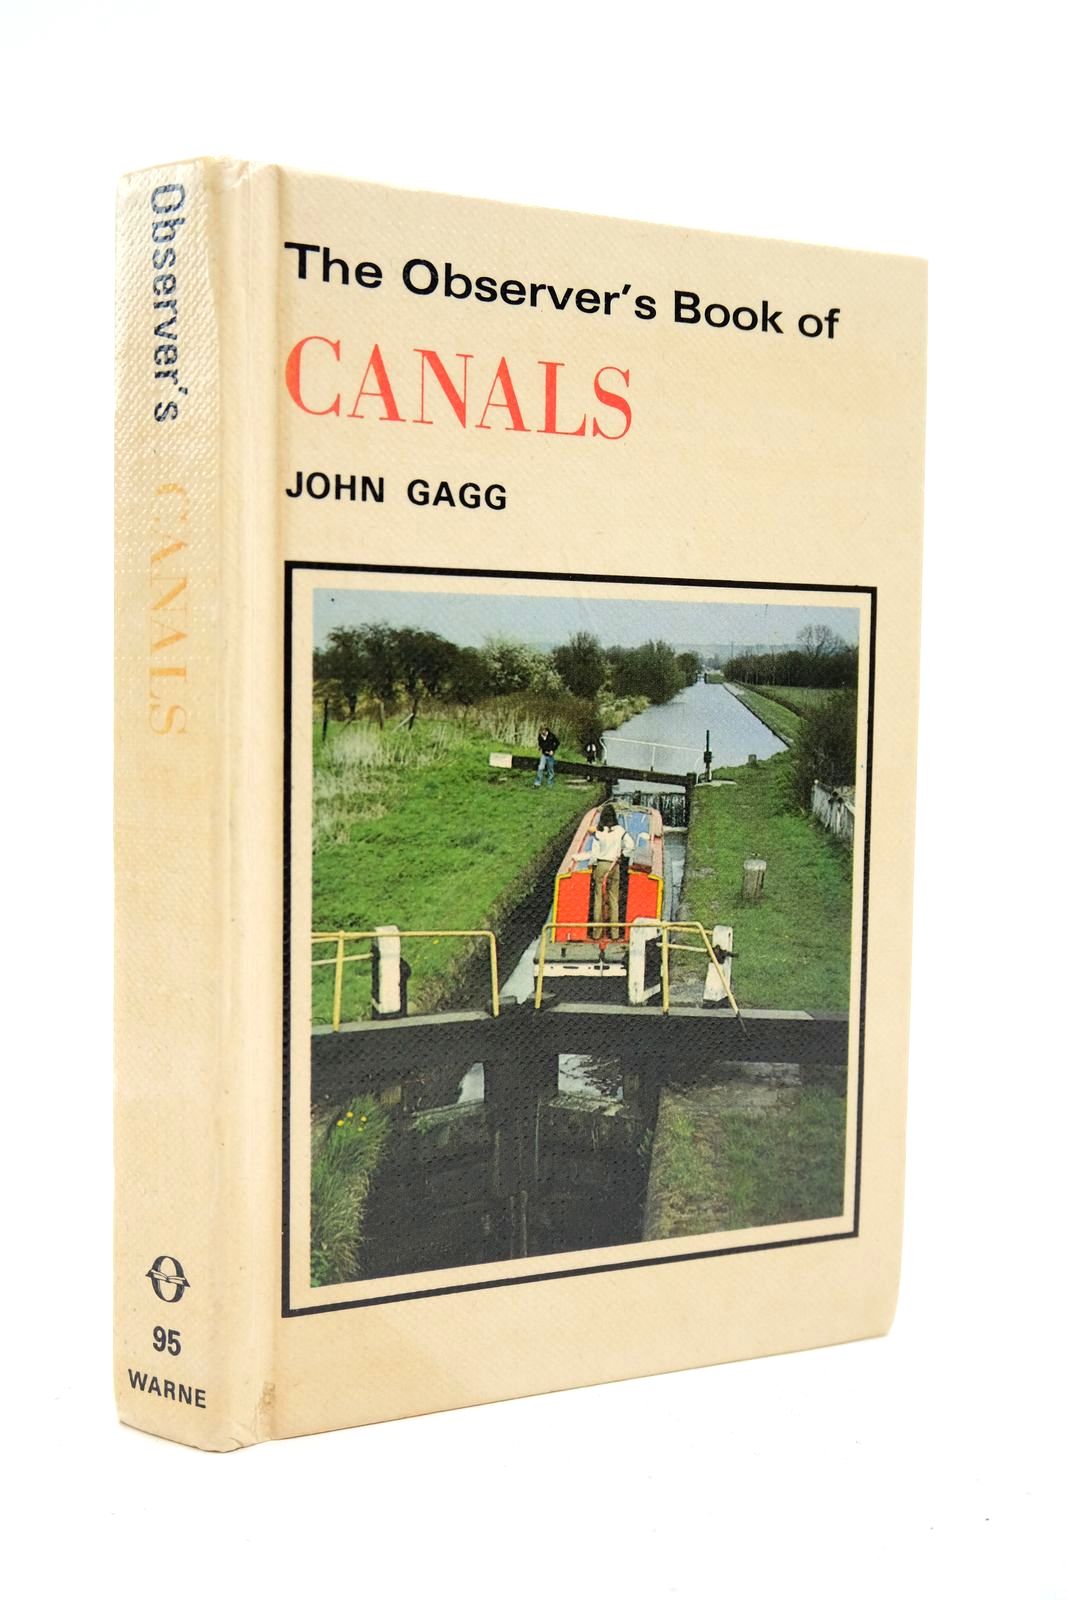 Photo of THE OBSERVER'S BOOK OF CANALS written by Gagg, John illustrated by Wilson, Robert published by Frederick Warne (Publishers) Ltd. (STOCK CODE: 2140428)  for sale by Stella & Rose's Books